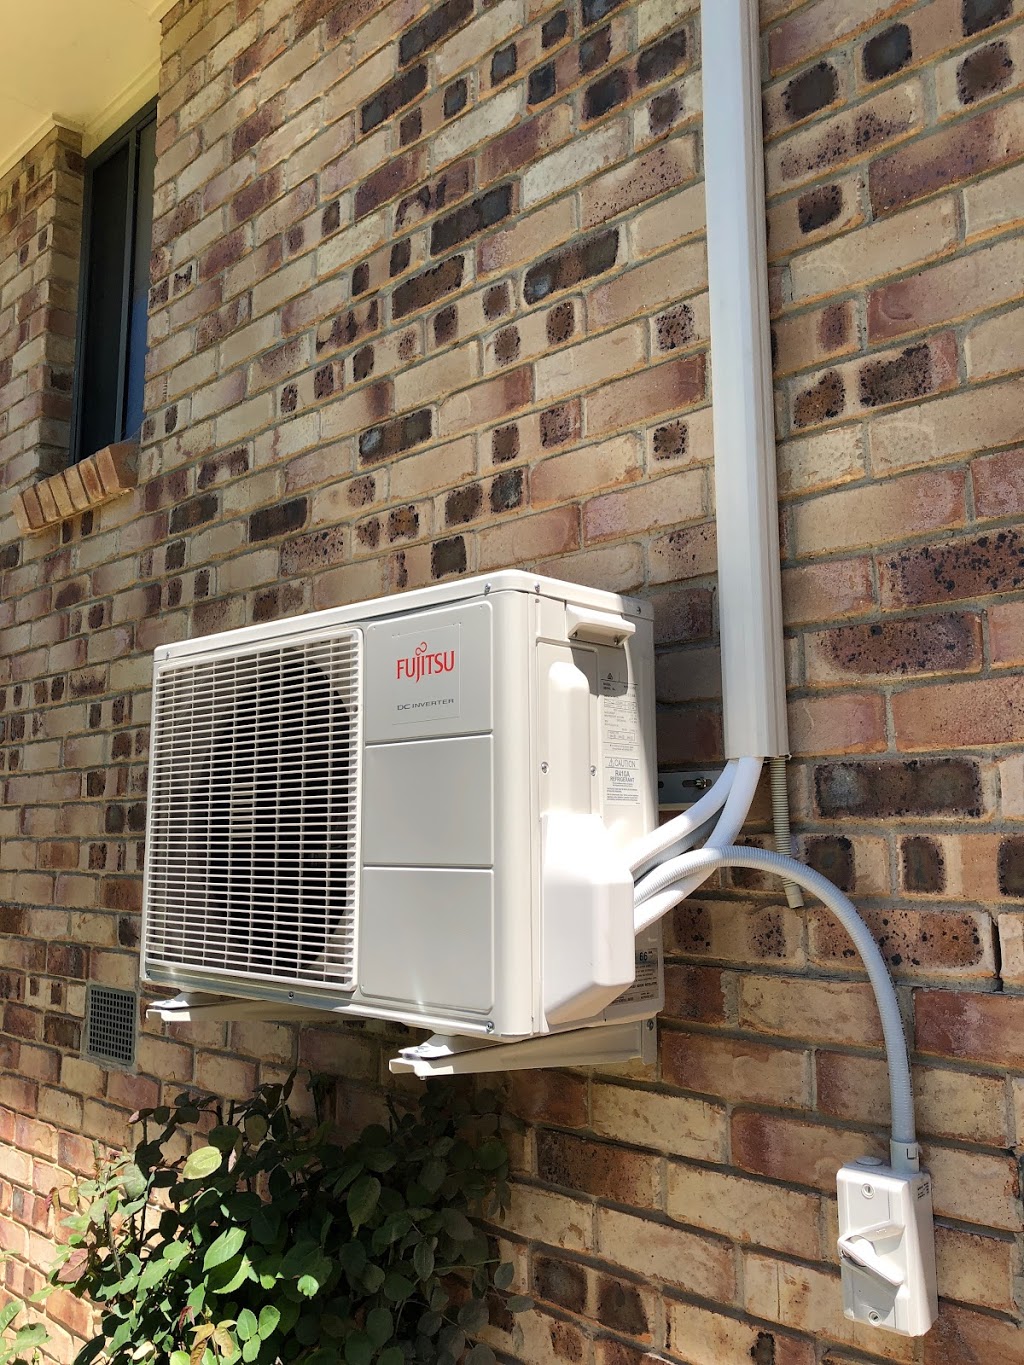 Clark Electrical & Air Conditioning | 5/12 Sandford St, Mitchell ACT 2611, Australia | Phone: 1300 230 462